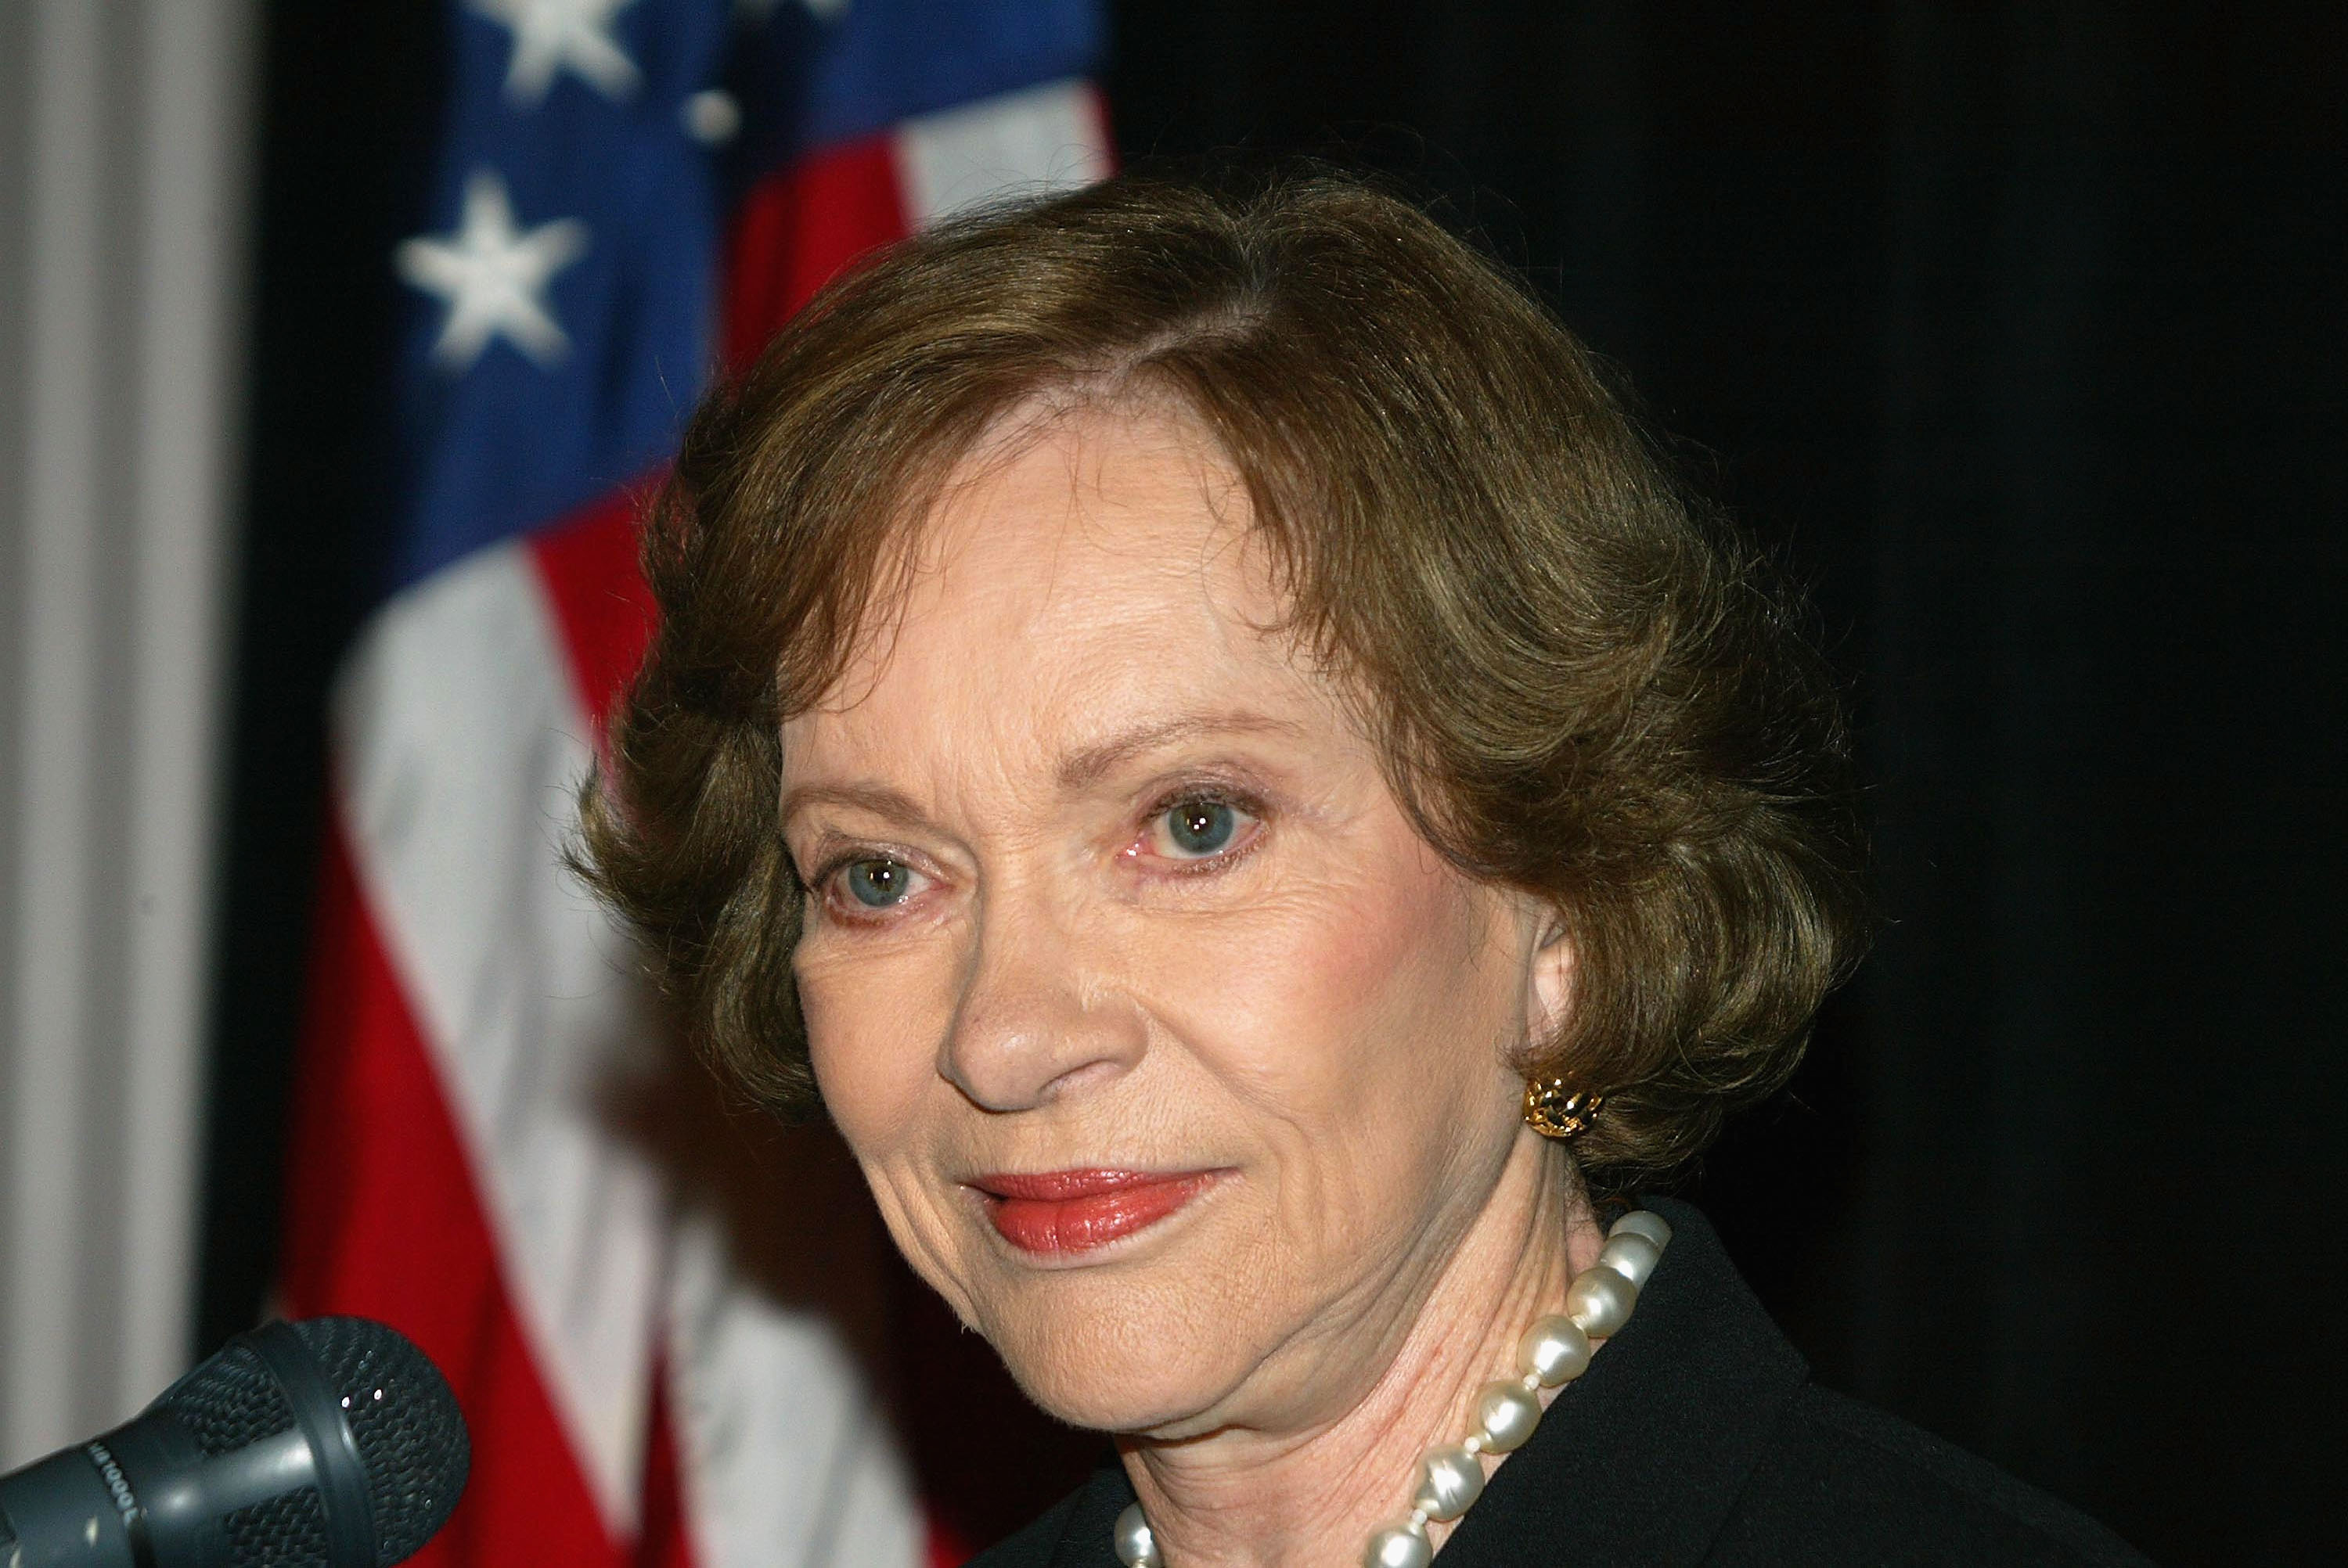 Rosalynn Carter 5 Fast Facts You Need to Know